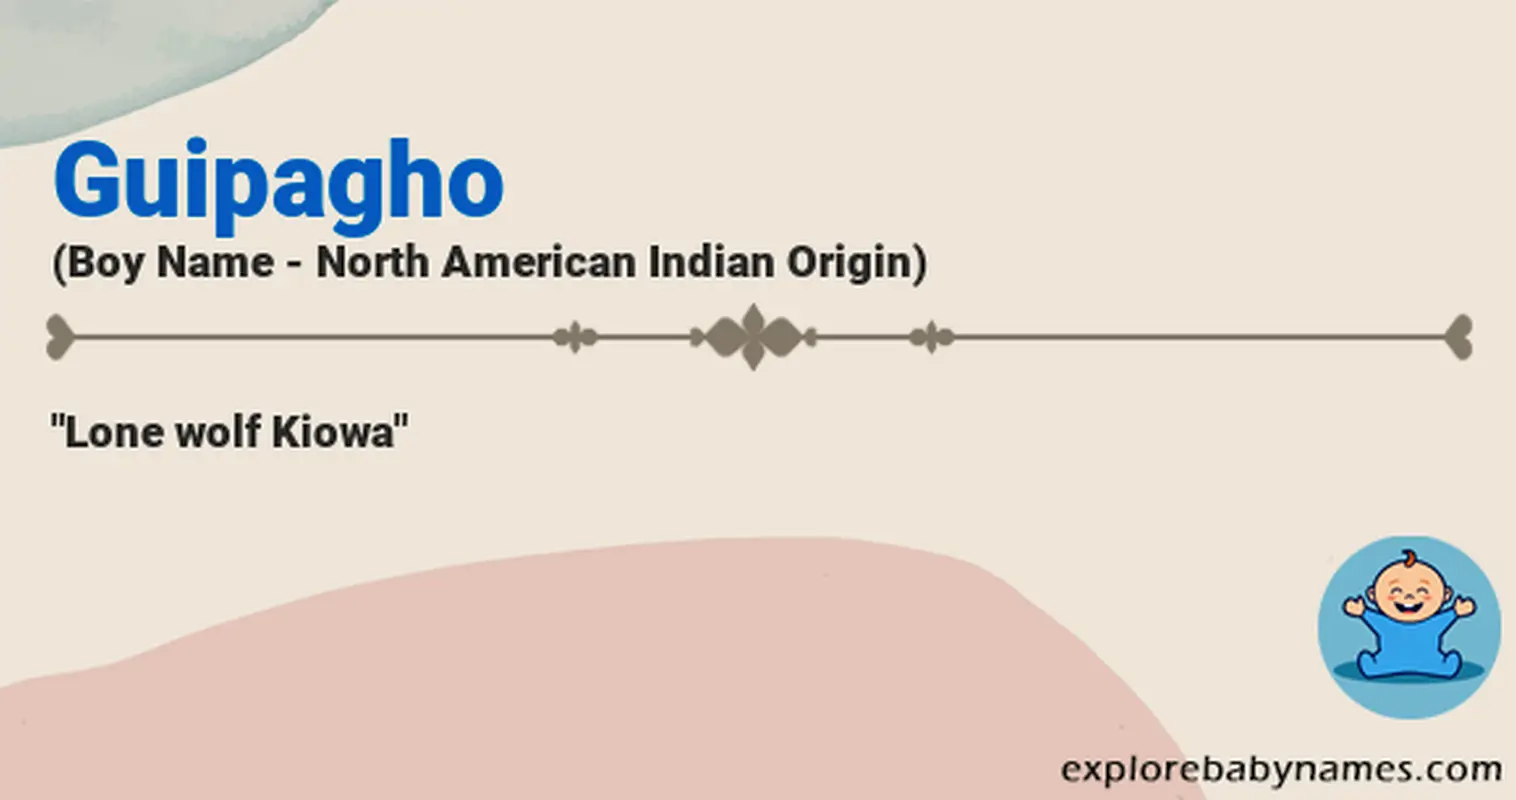 Meaning of Guipagho